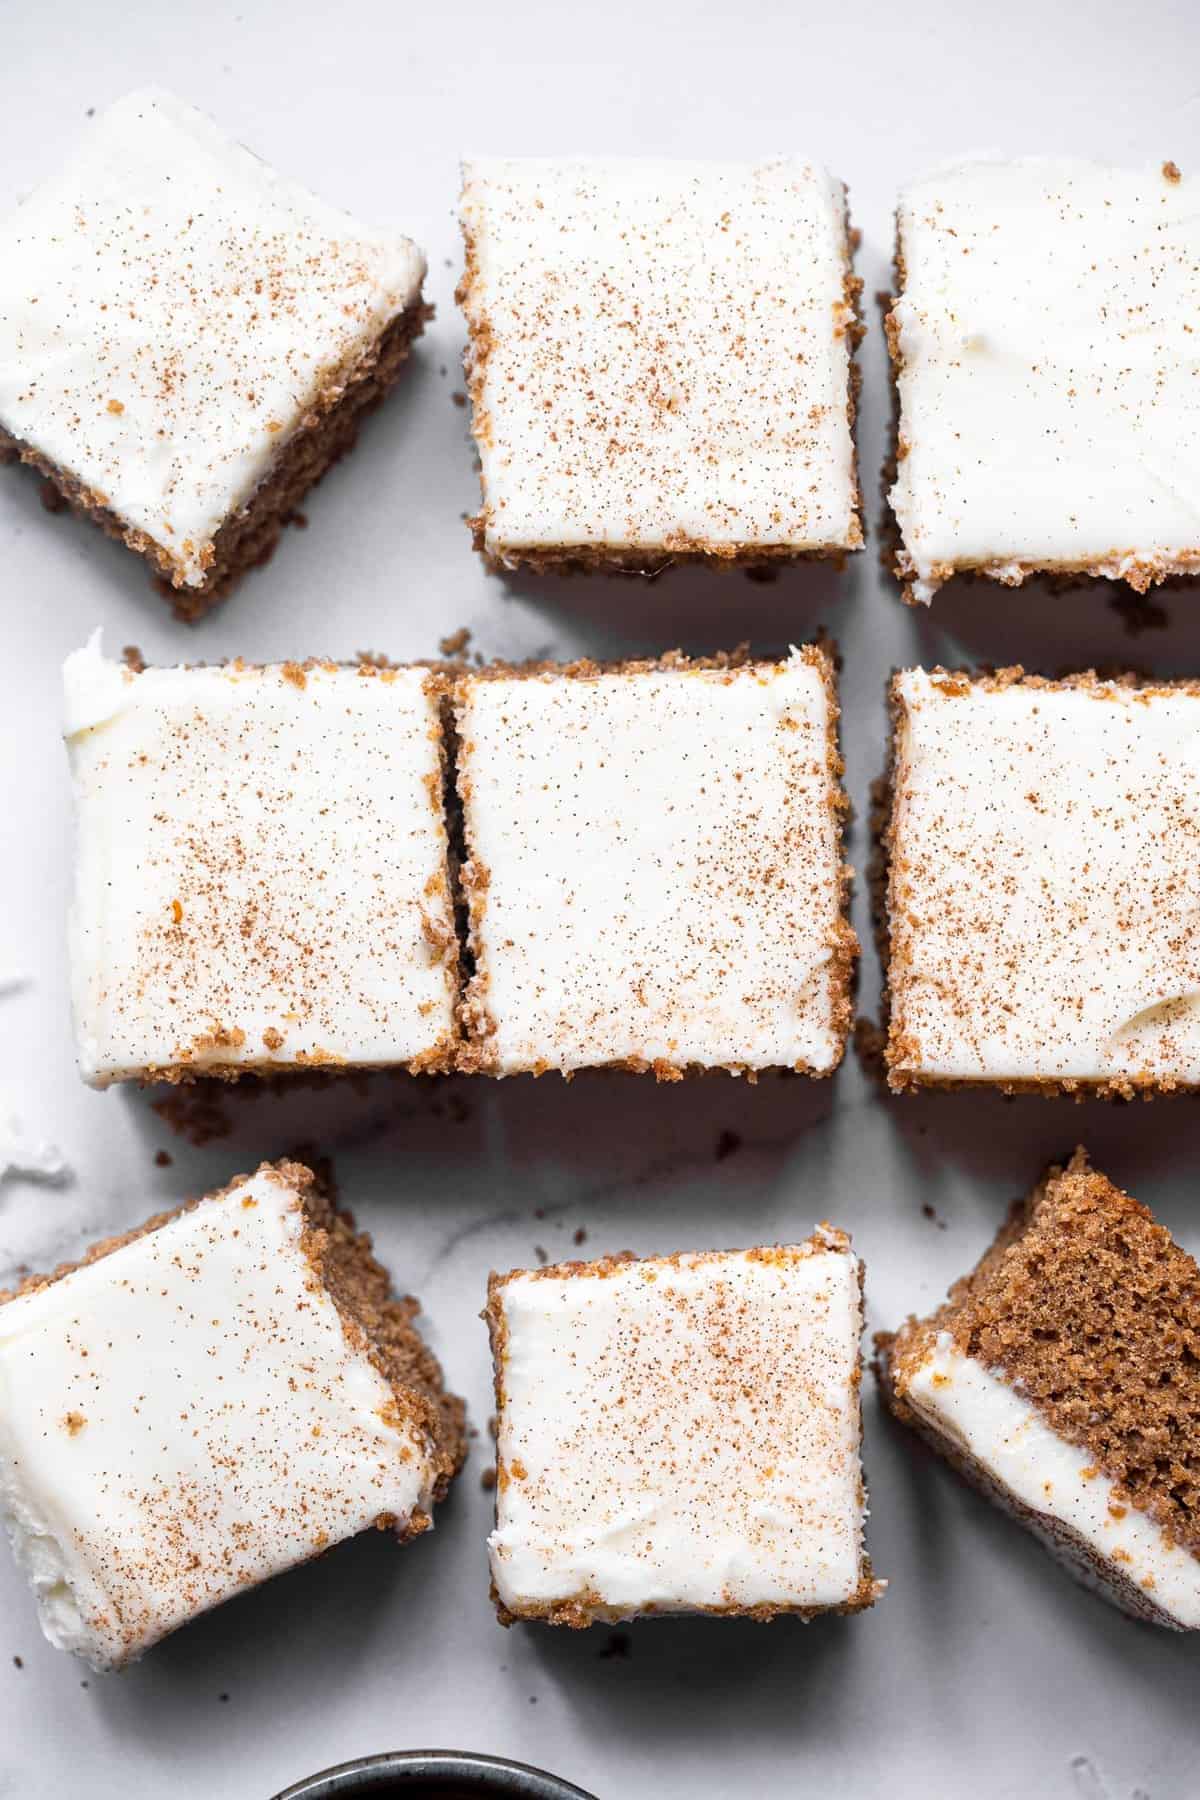 Gluten free gingerbread sliced into squares on a table